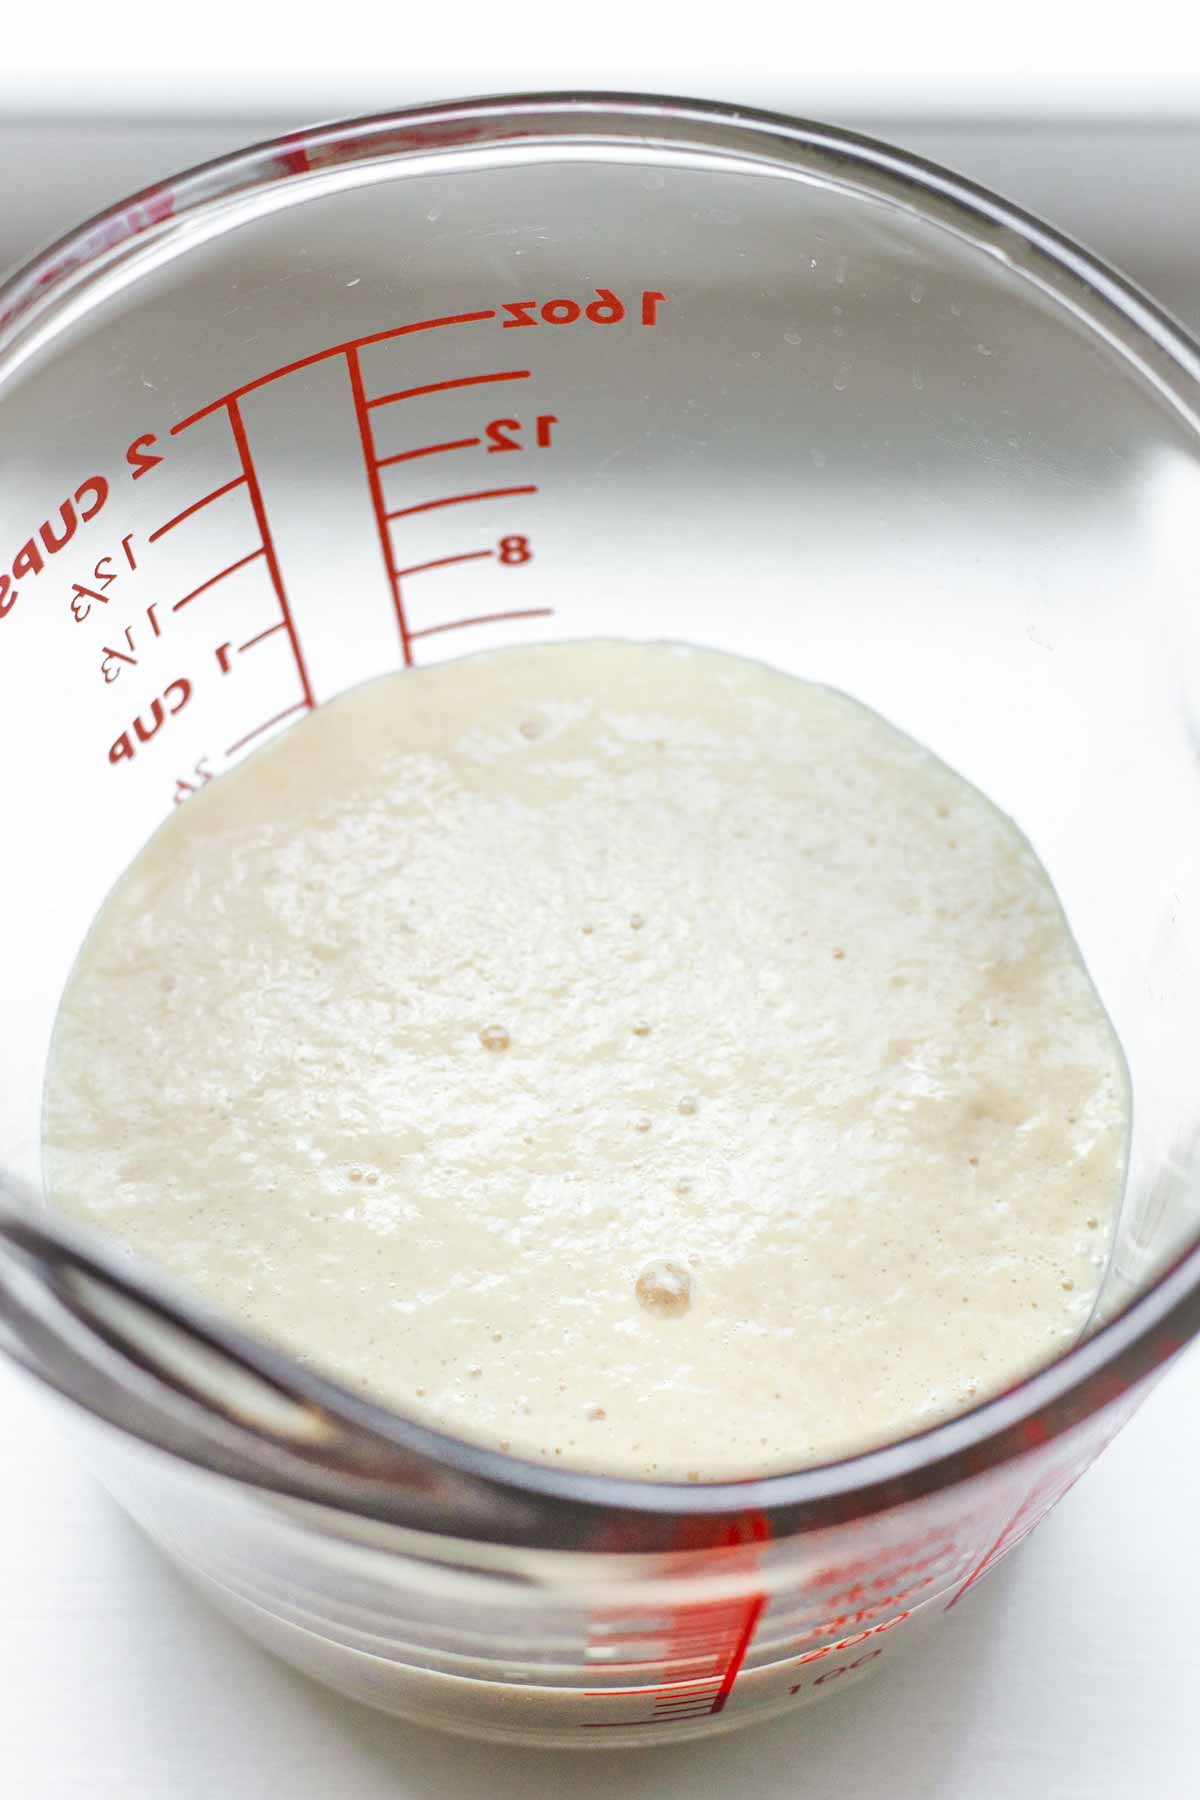 yeast foamed up in a glass measuring cup